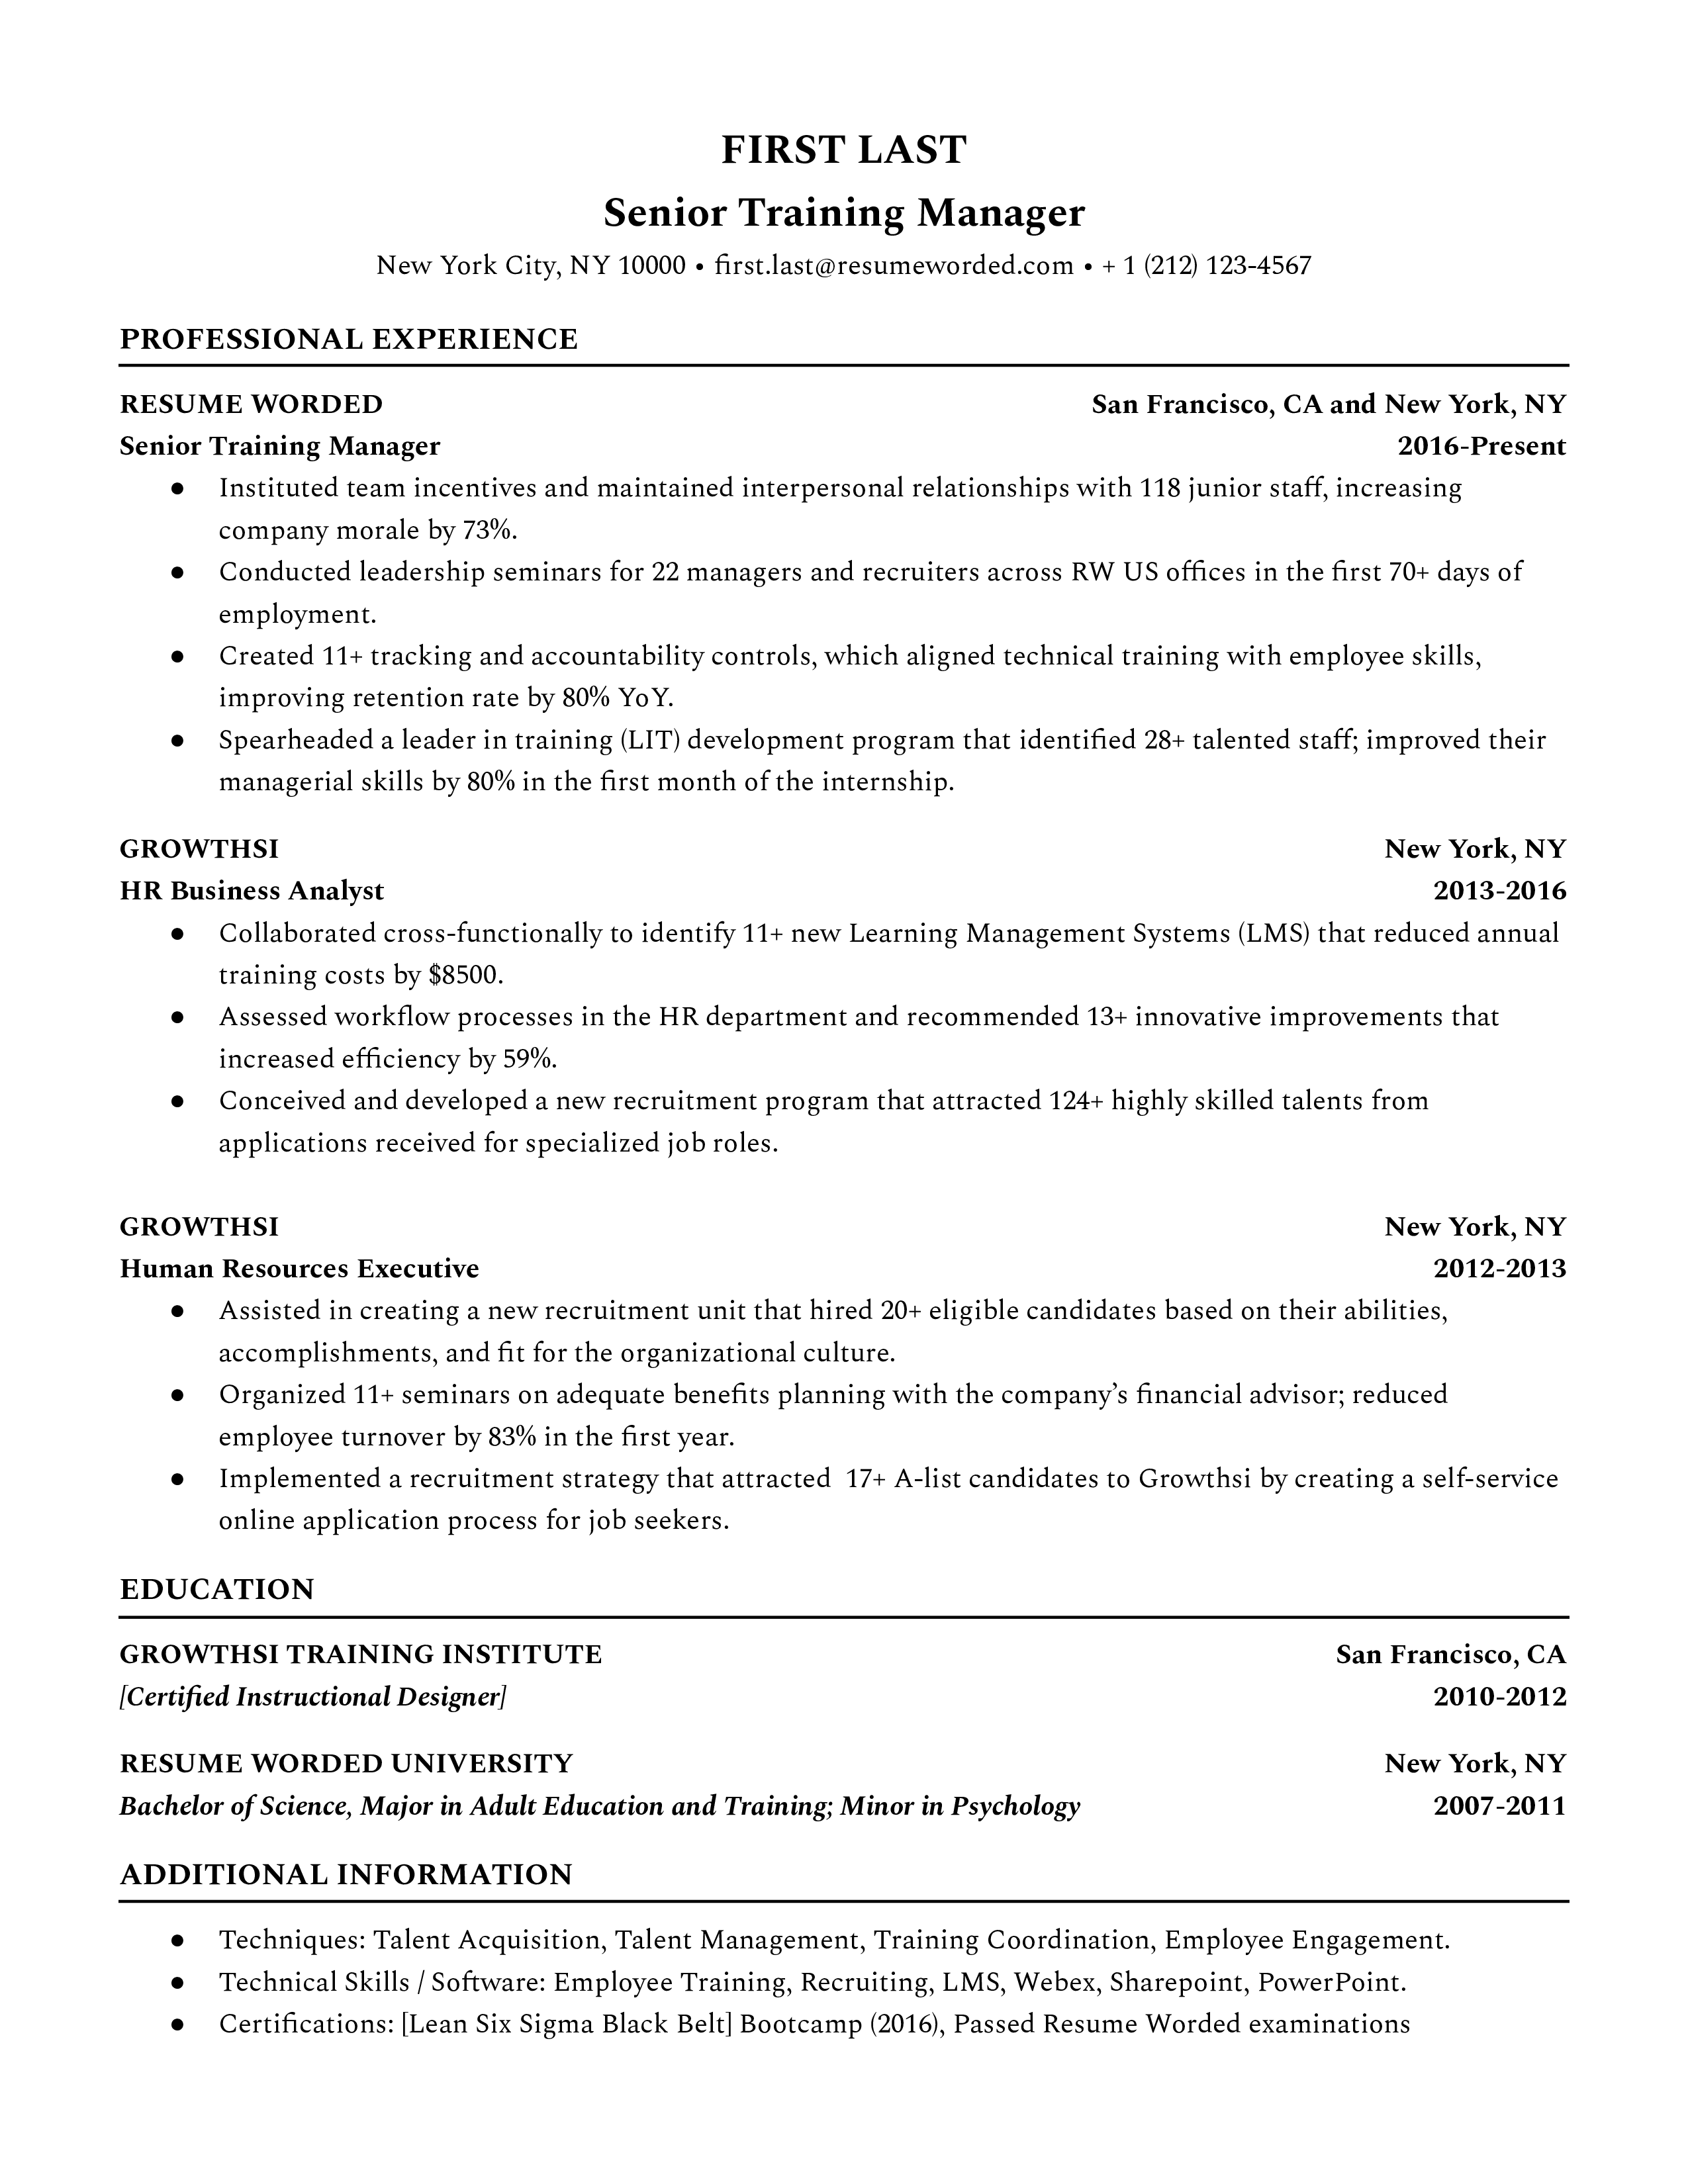 A senior training manager resume template that highlights their educational background.